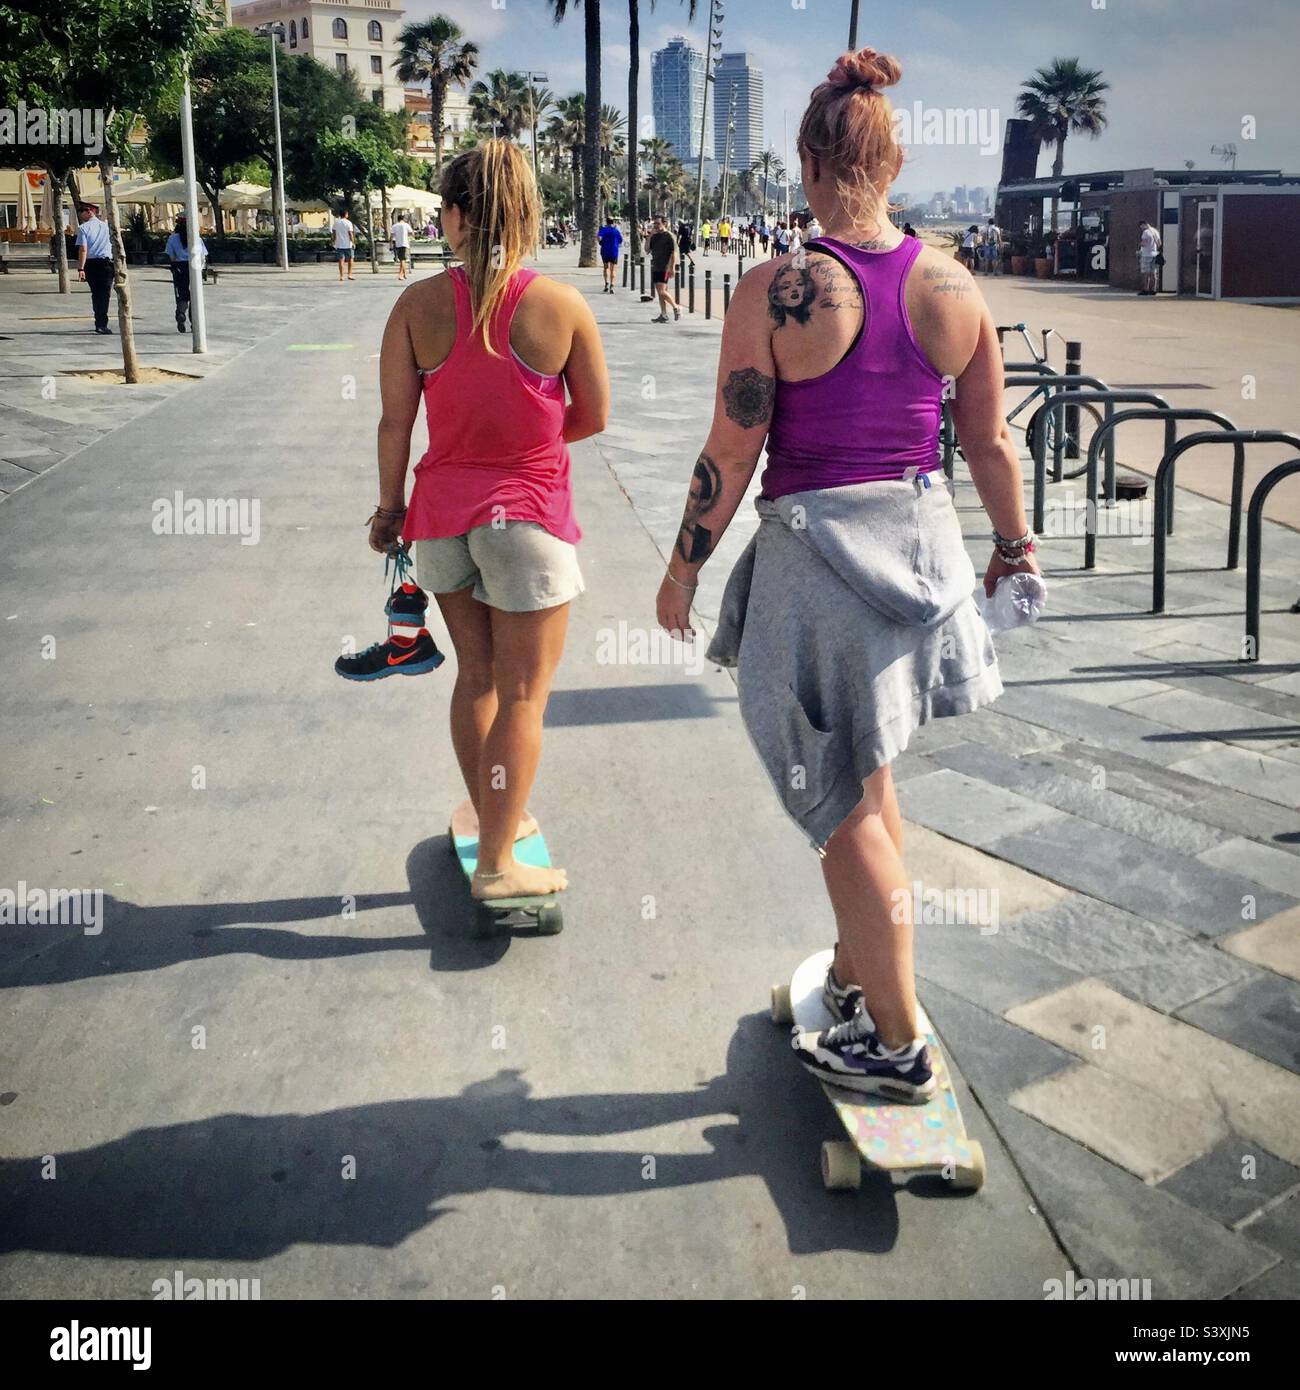 Two women in sport training gear skateboard together along the seafront of the busy city beach of Barceloneta in Barcelona, Spain Stock Photo